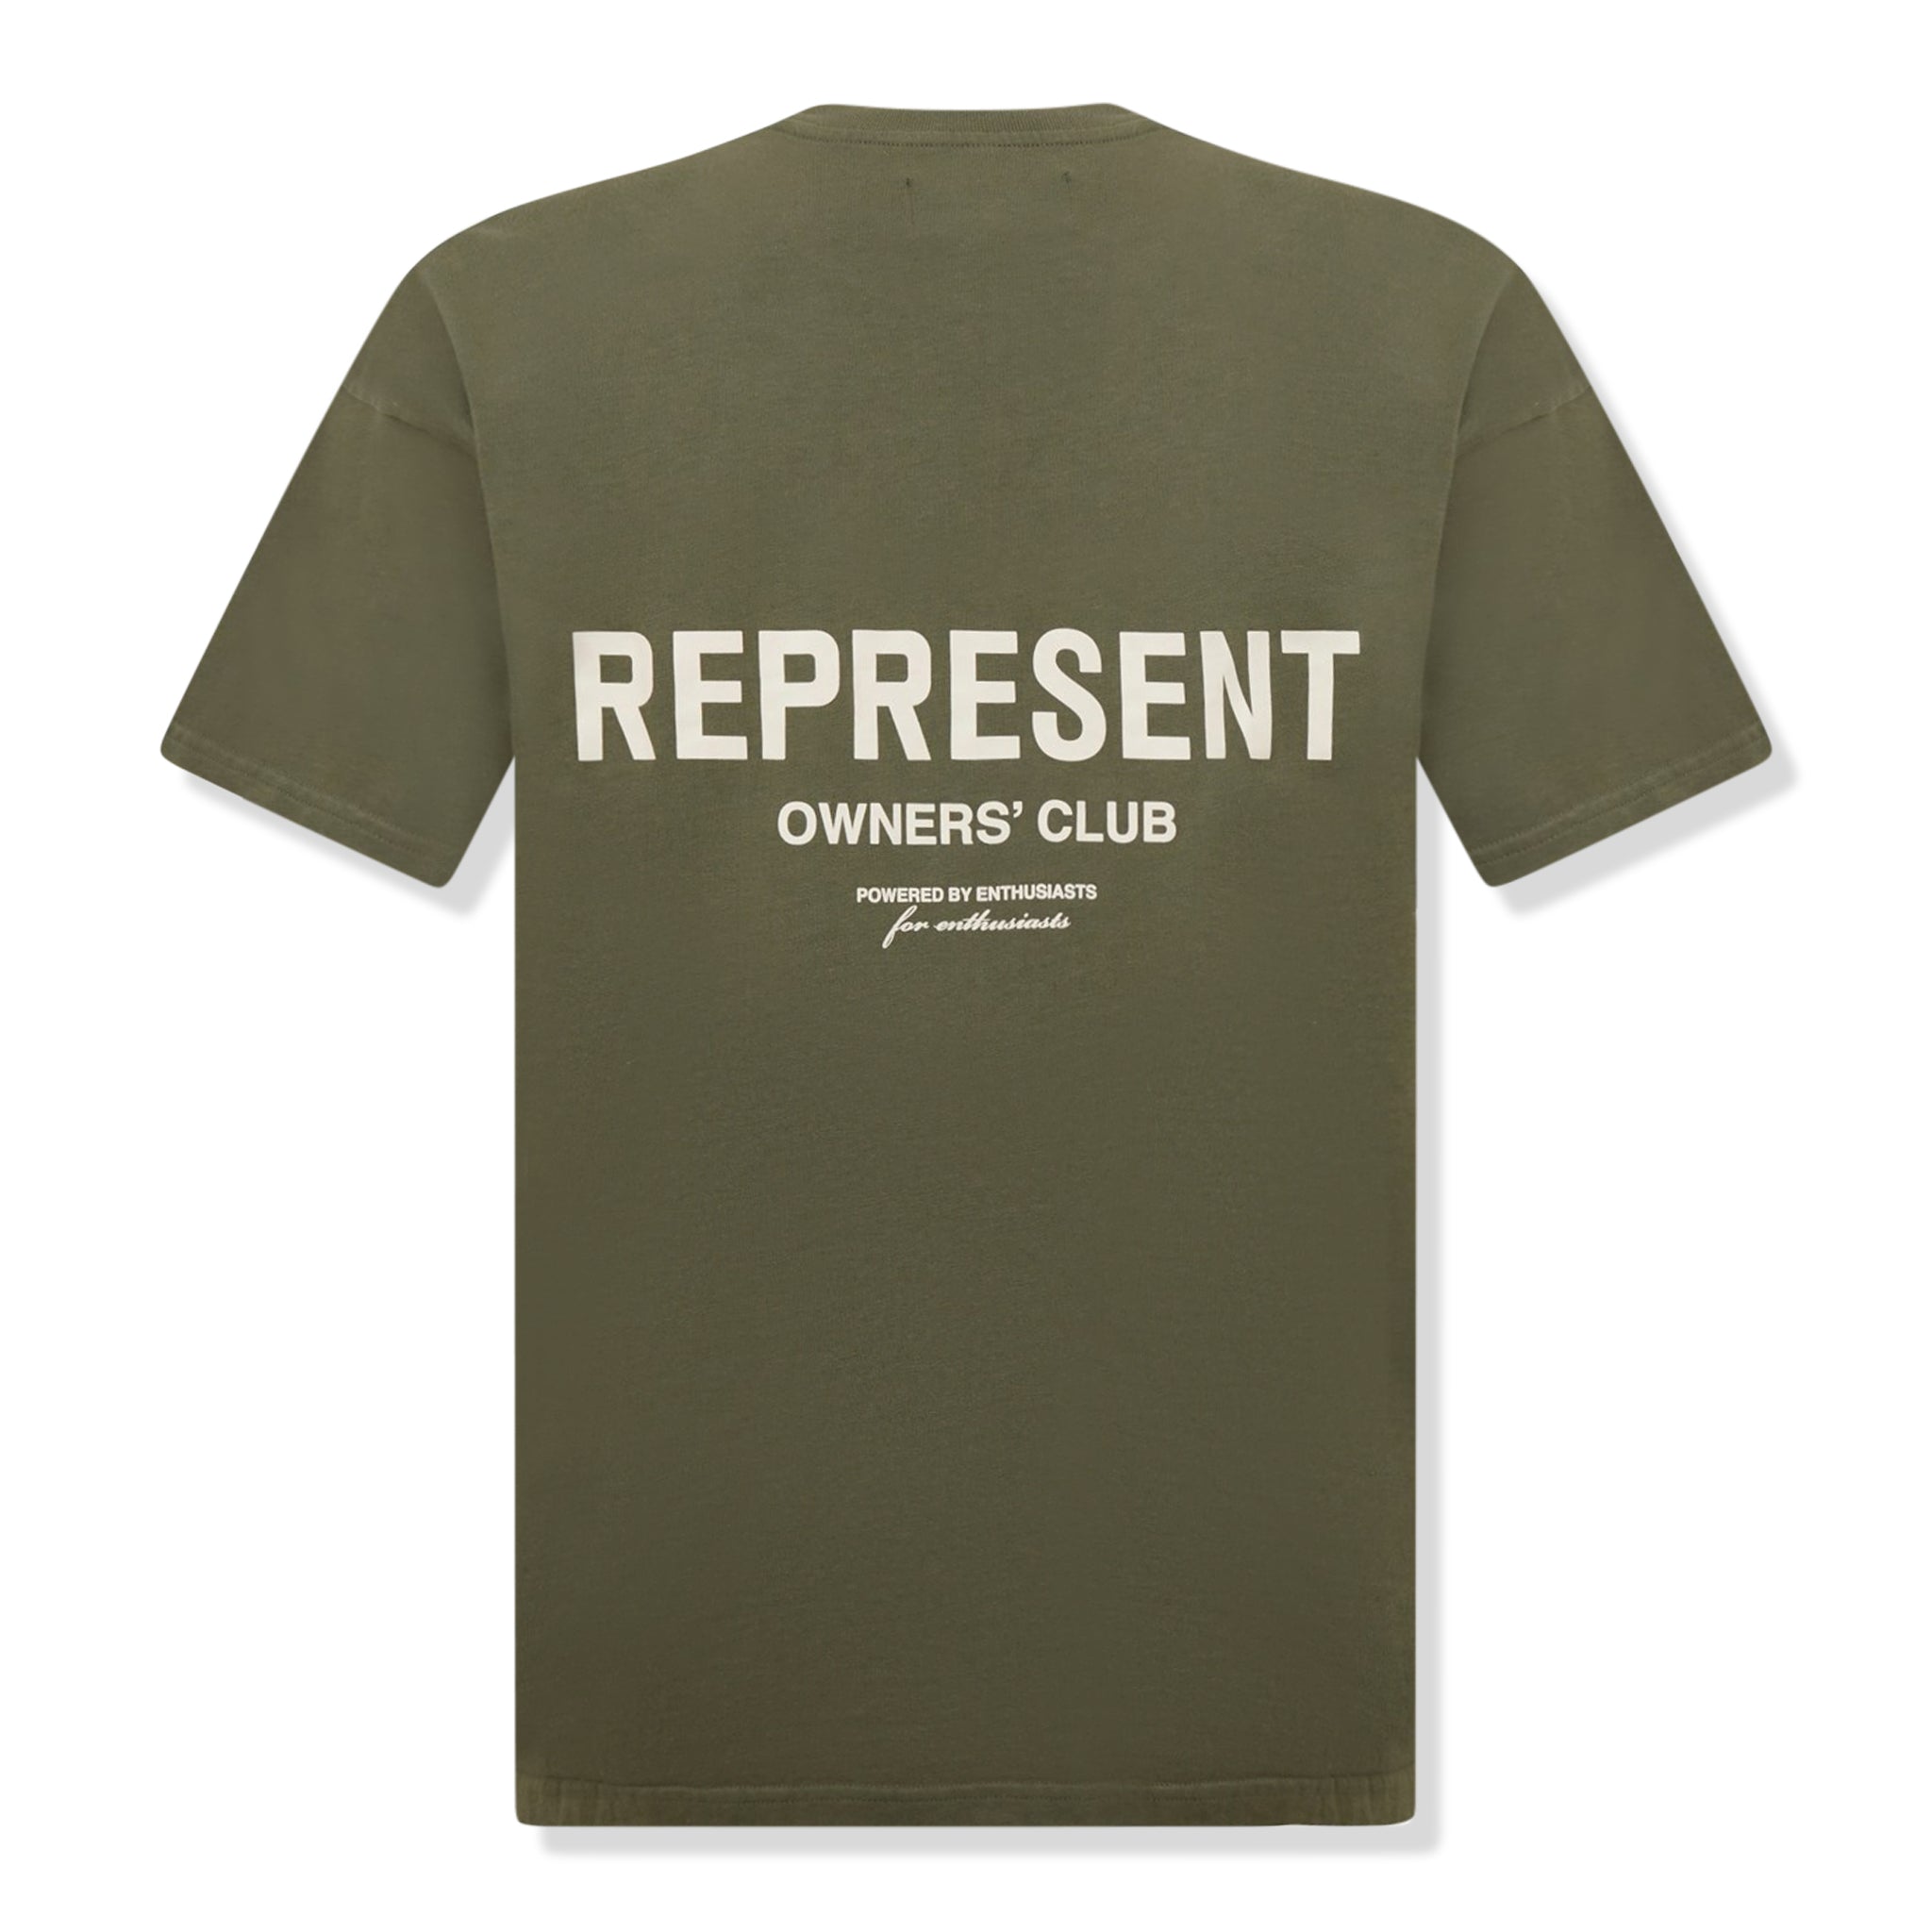 Back view Represent Owners Club Olive T Shirt MT4007-07